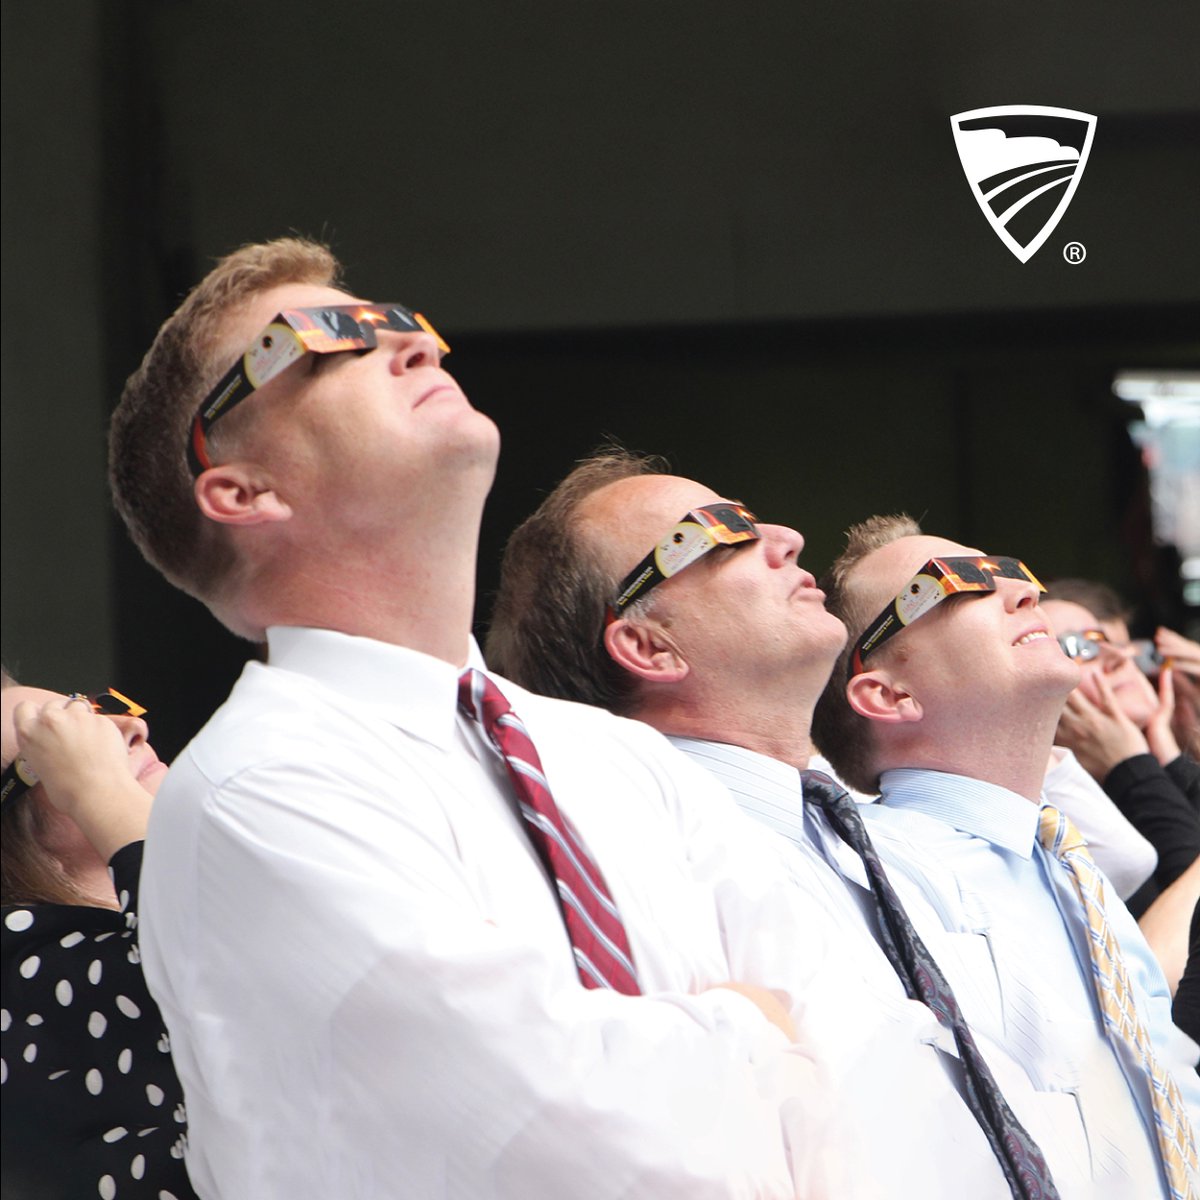 During the last solar eclipse in 2017, employees watched from outside as the moon passed in front of the sun. 🌞🌕 Today's eclipse is the last one in North America until 2044. Where will you be watching from?